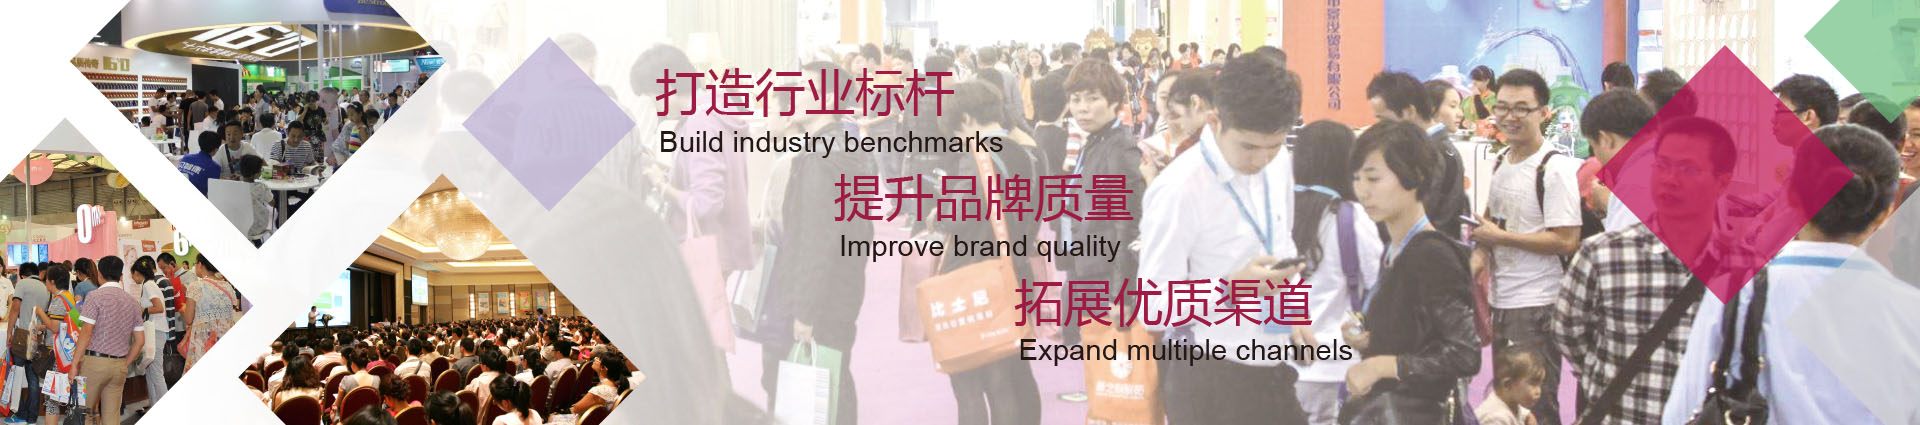 Yiwu International Toys and Baby Products ExpoAnd E-commerce Selection Conference 2024